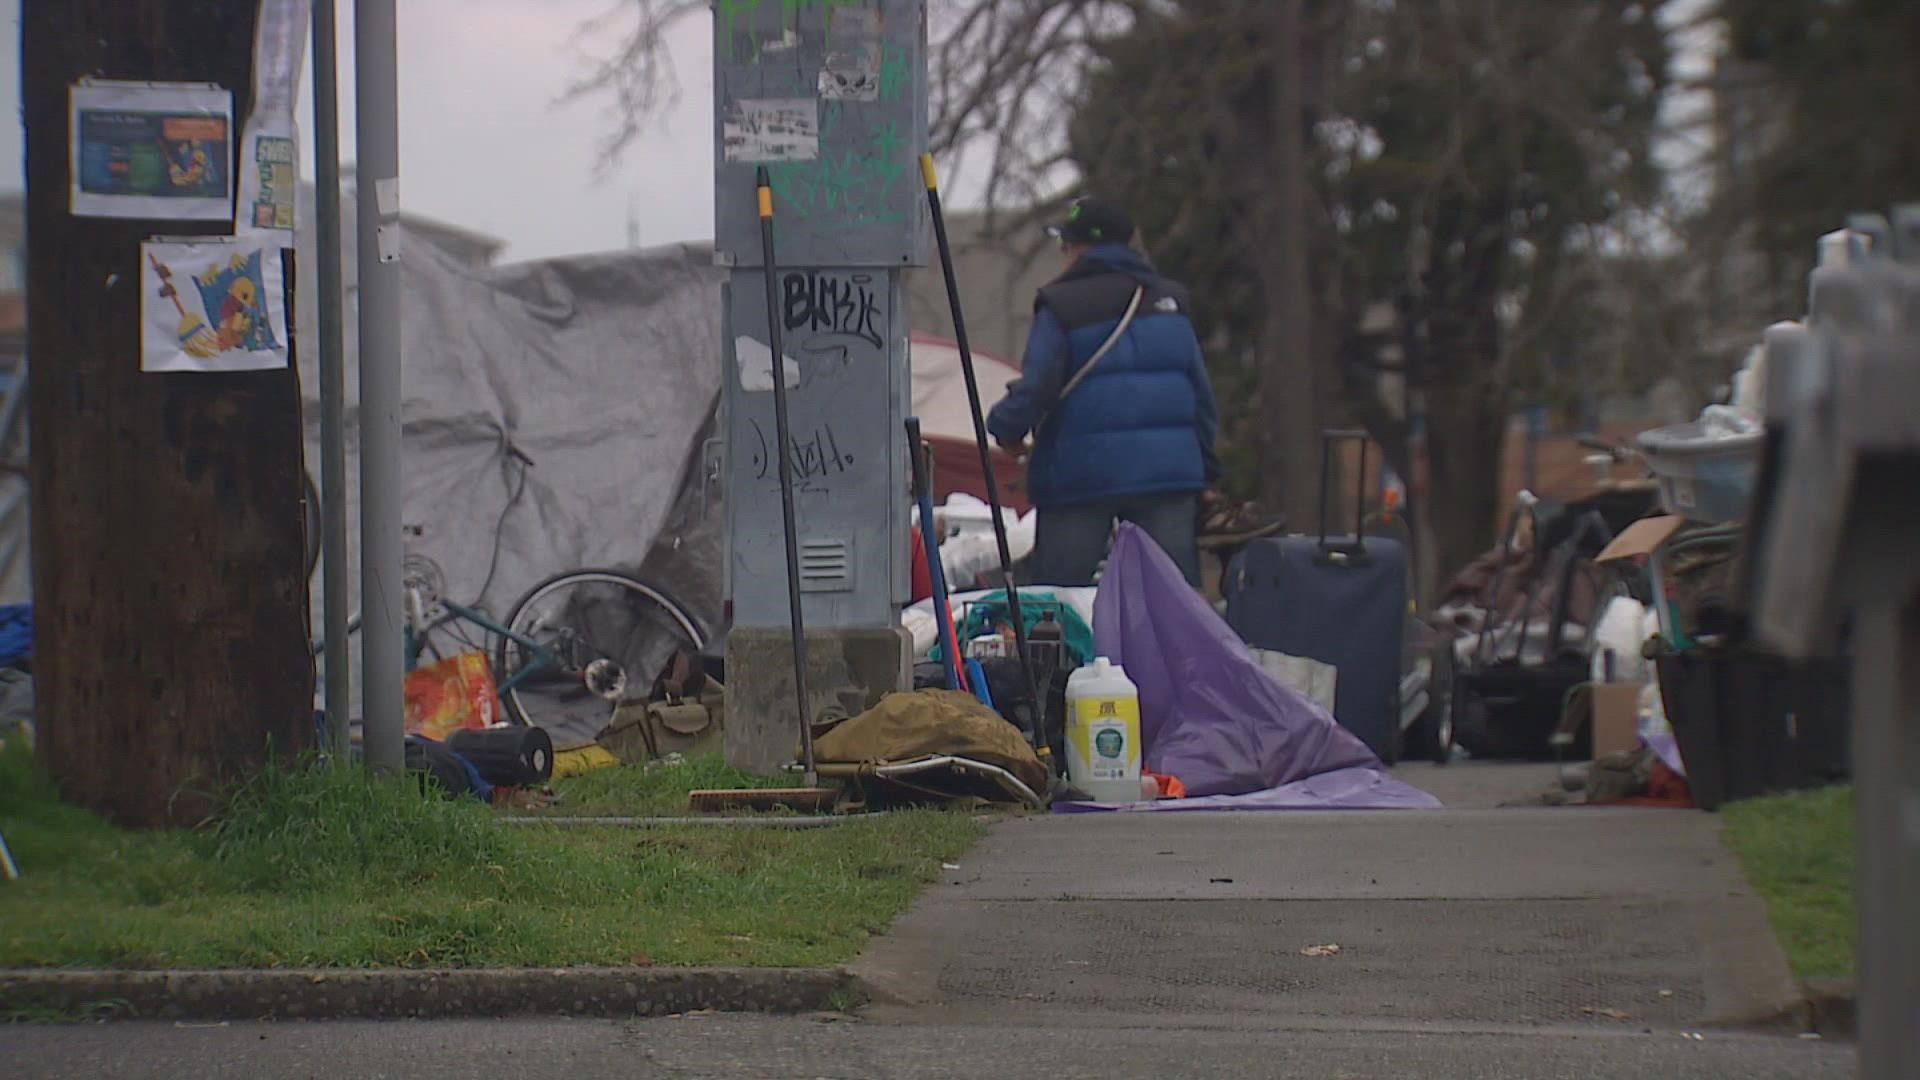 City outreach workers say none of the individuals living there accepted services for shelters.